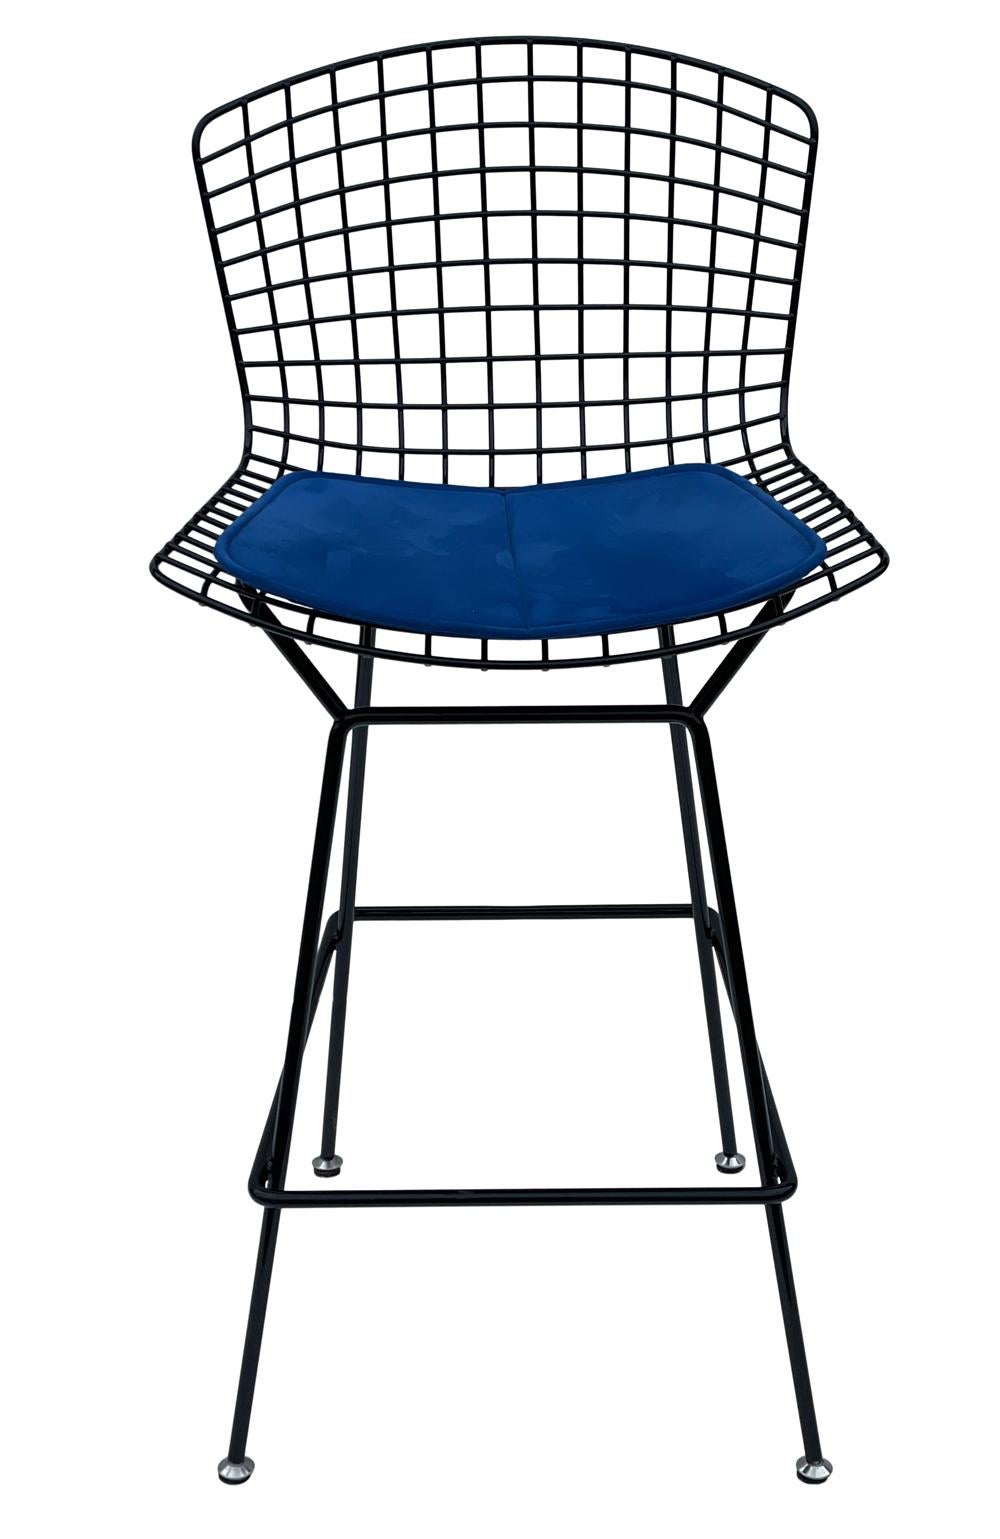 A classic design by Harry Bertoia for Knoll. It features a black powder coat frame with blue suede seat cushion. Manufacturer stamp on frame.